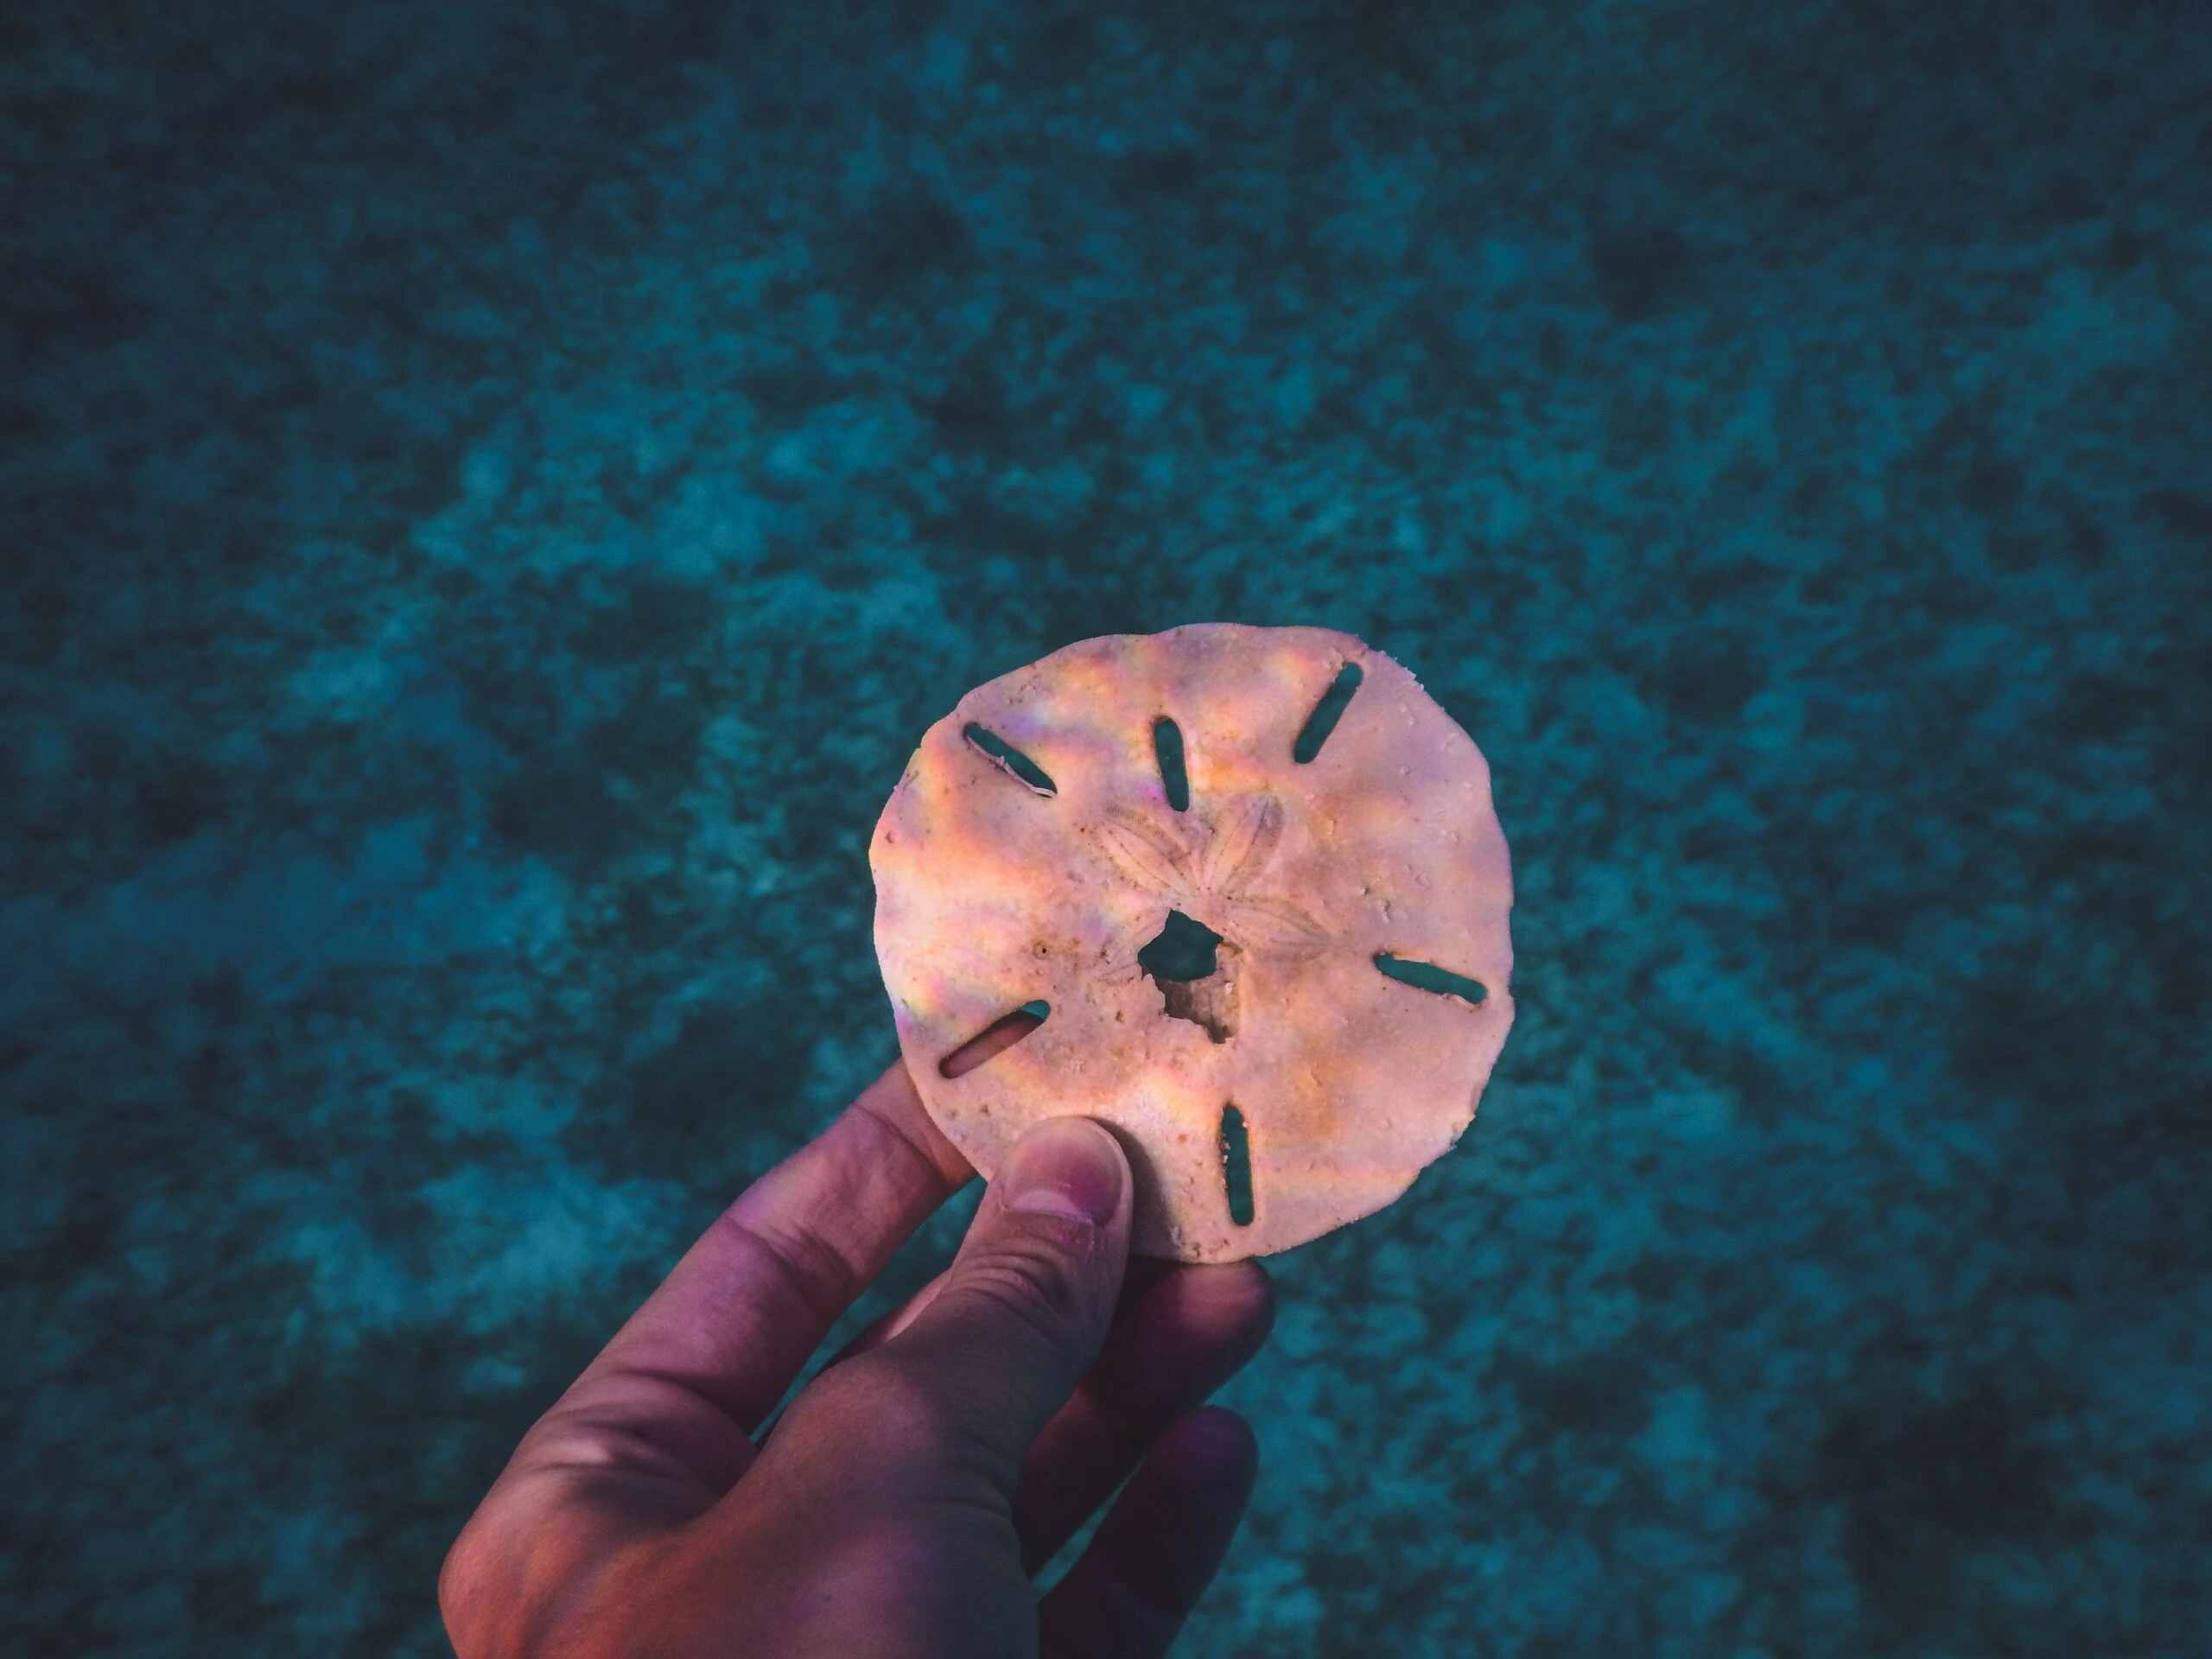 Sand Dollar in the hand close up with black coral background underwater by Analia Ferrario from Unsplash